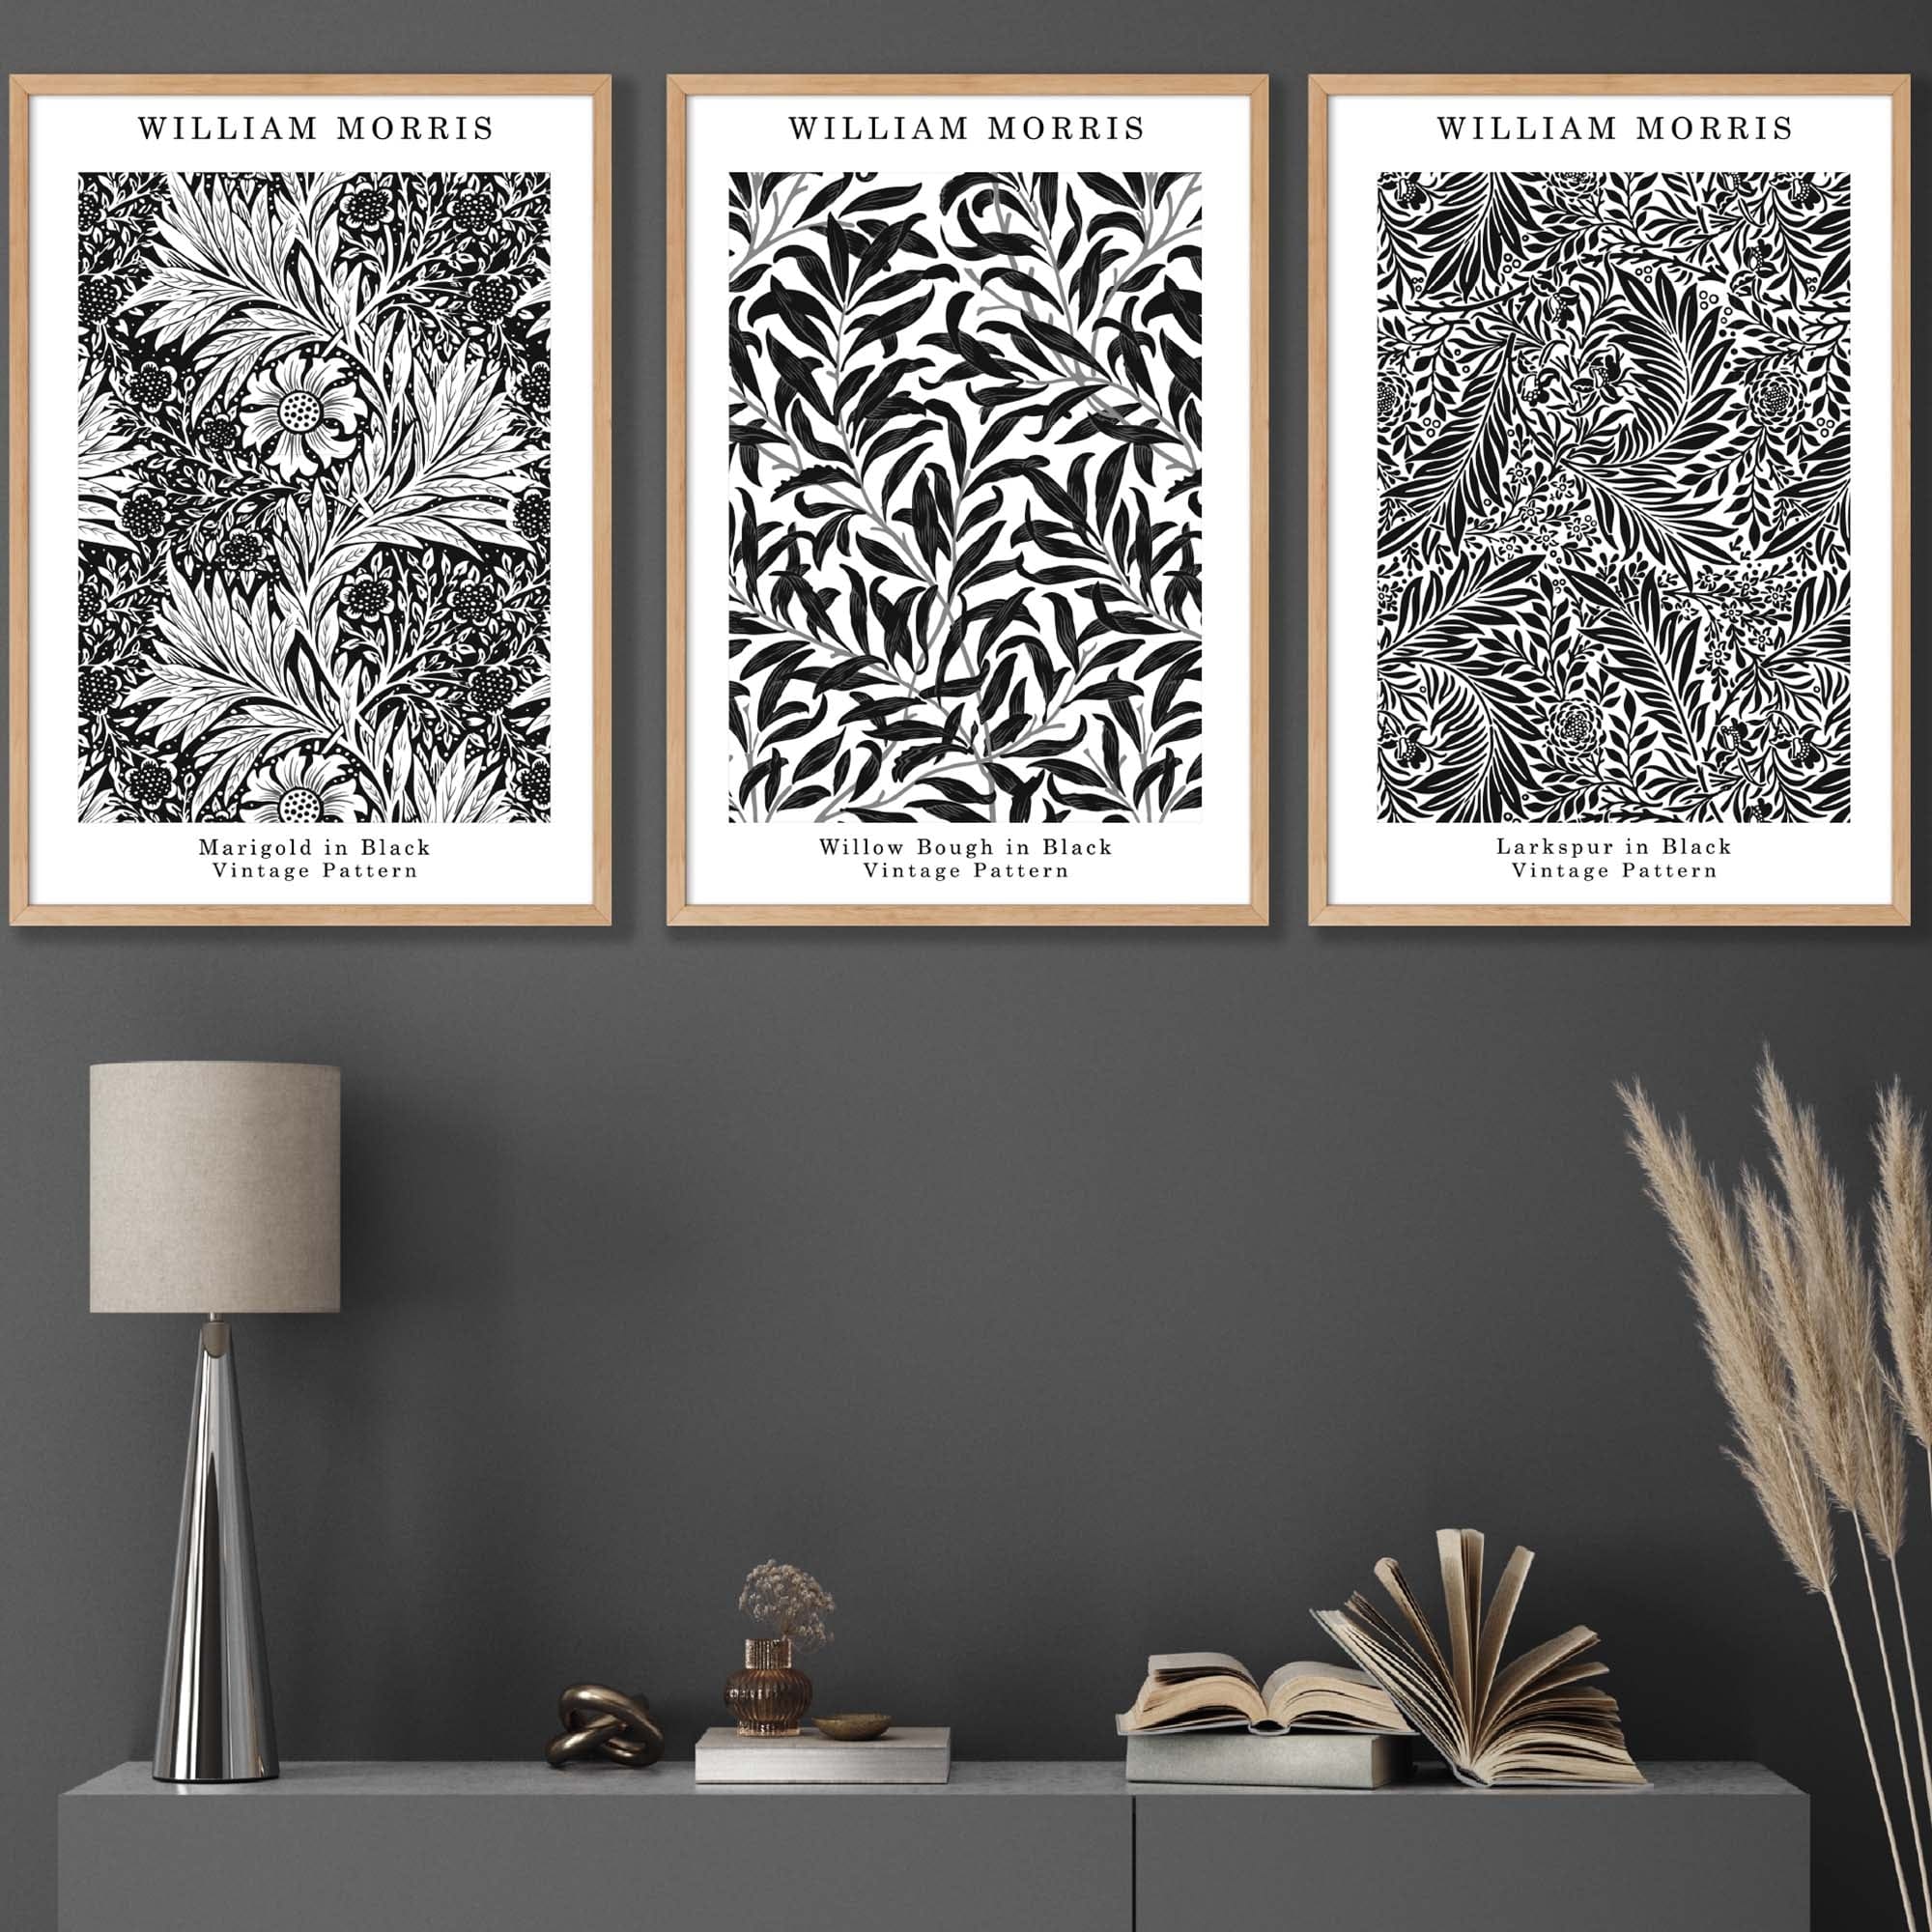 William Morris Vintage Floral Wall Art Prints in Black and White